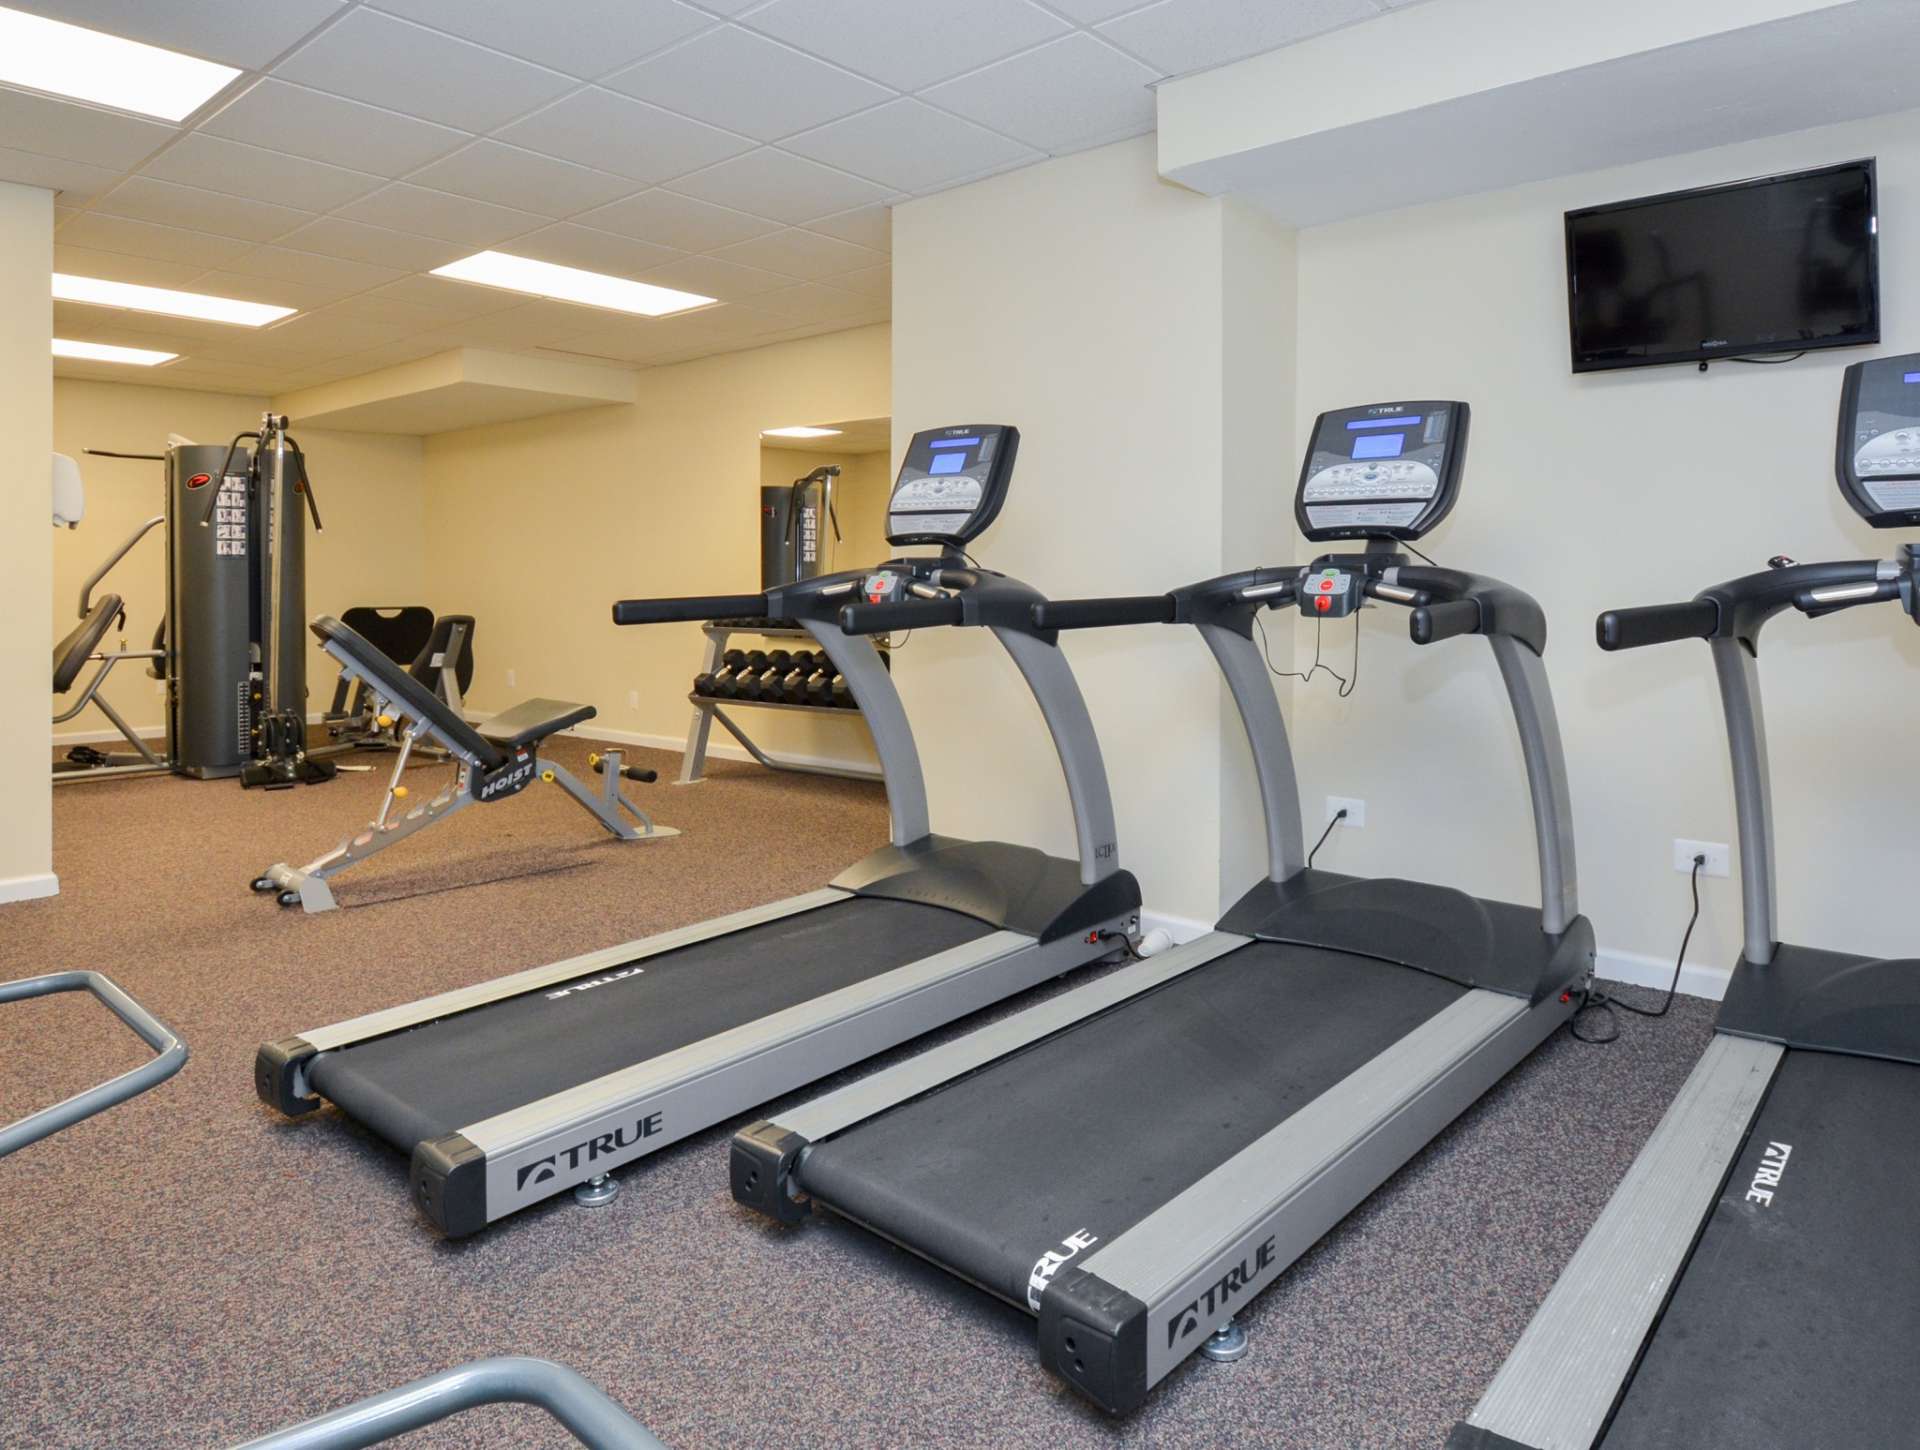 3 treadmills in front of a TV hanging on a wall in an indoor gym.